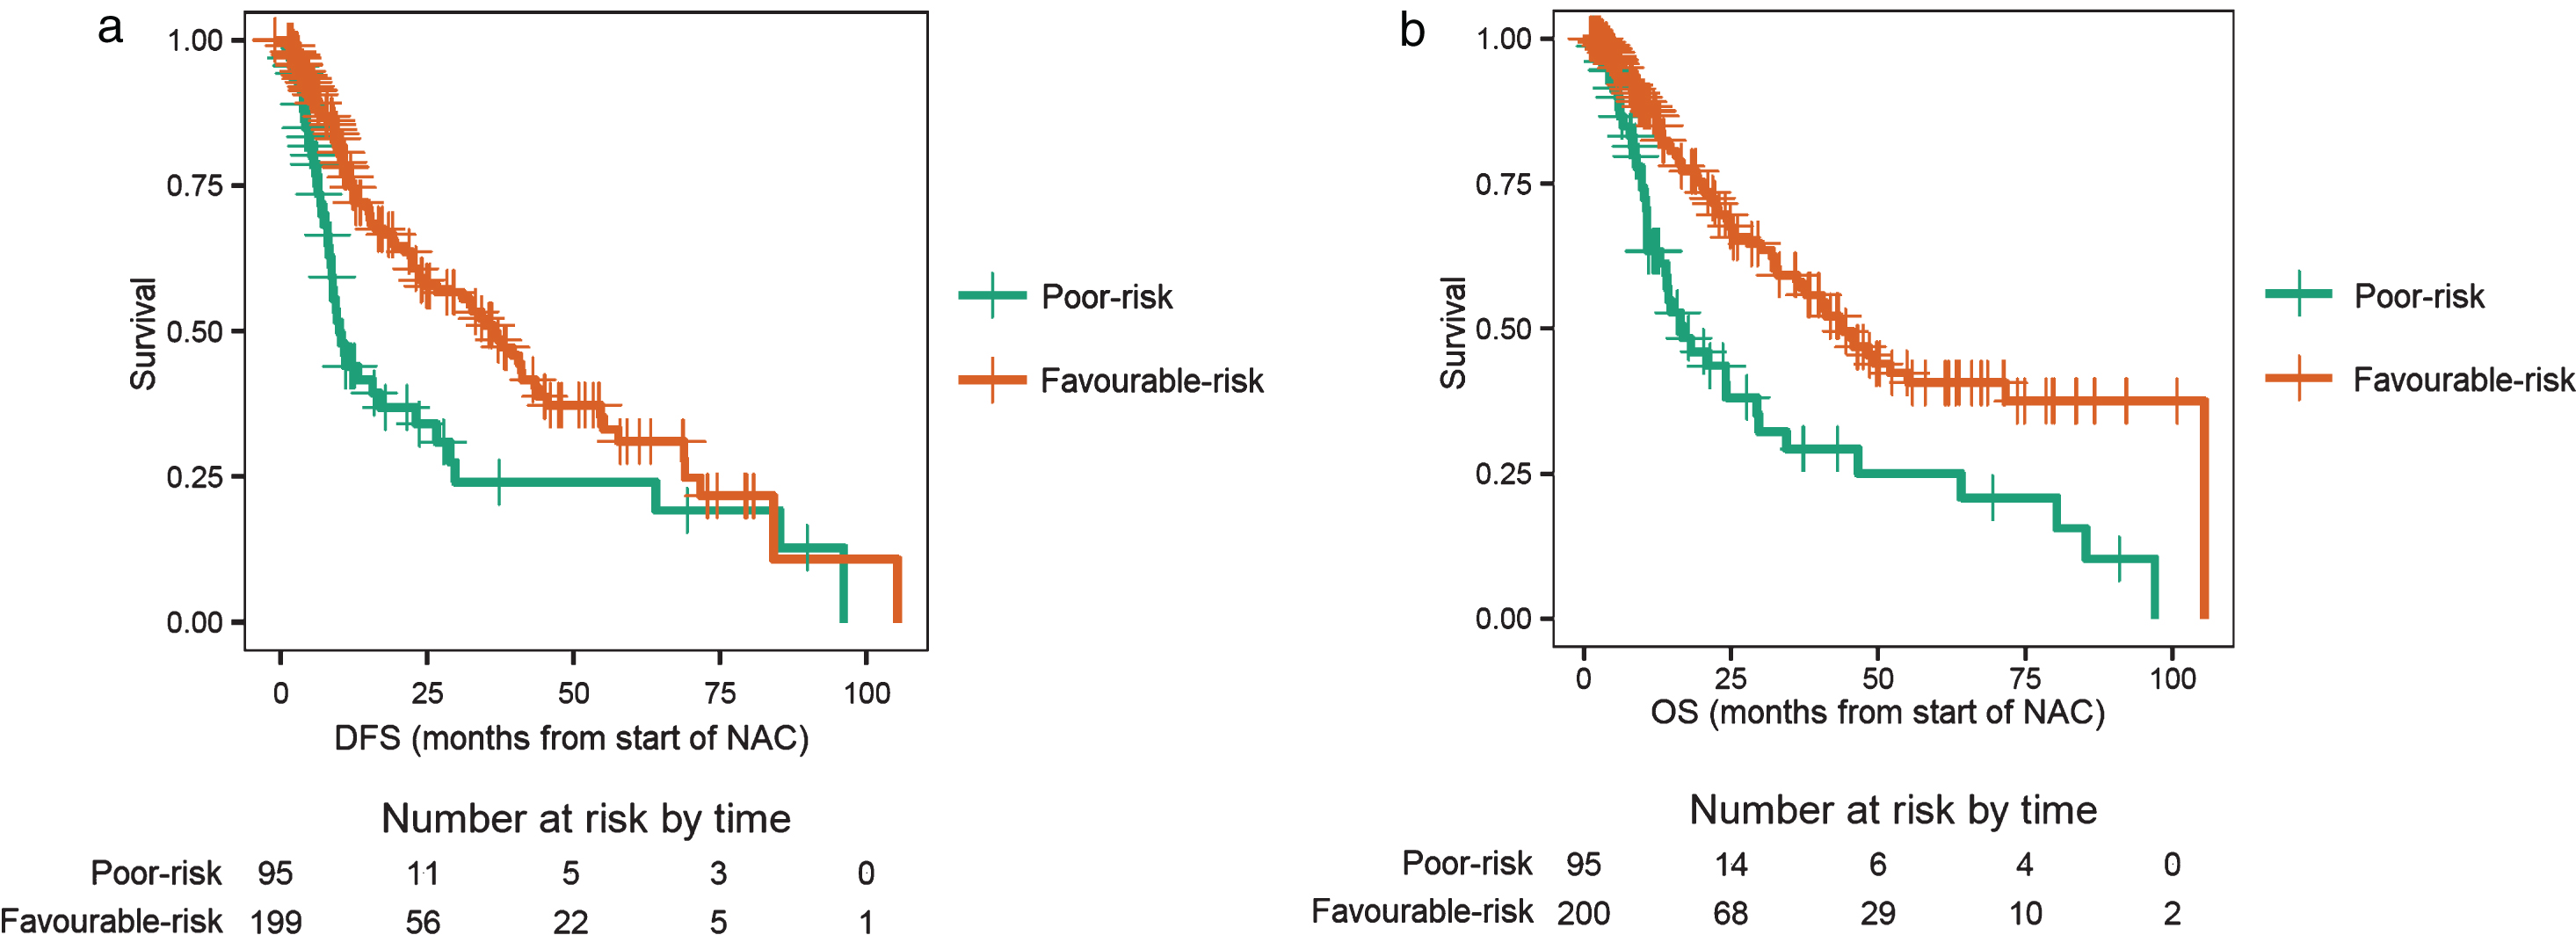 a. Disease-free survival (DFS) for patients with ‘poor-risk’ disease compared with ‘favourable-risk’ disease. Poor-risk patients had a sustained high neutrophil-to-lymphocyte ratio (NLR) after two cycles of neoadjuvant chemotherapy (NAC). b. Overall survival (OS) for patients with ‘poor-risk’ disease compared with ‘favourable-risk’ disease. Poor-risk patients had a sustained high neutrophil-to-lymphocyte ratio (NLR) after two cycles of neoadjuvant chemotherapy (NAC).